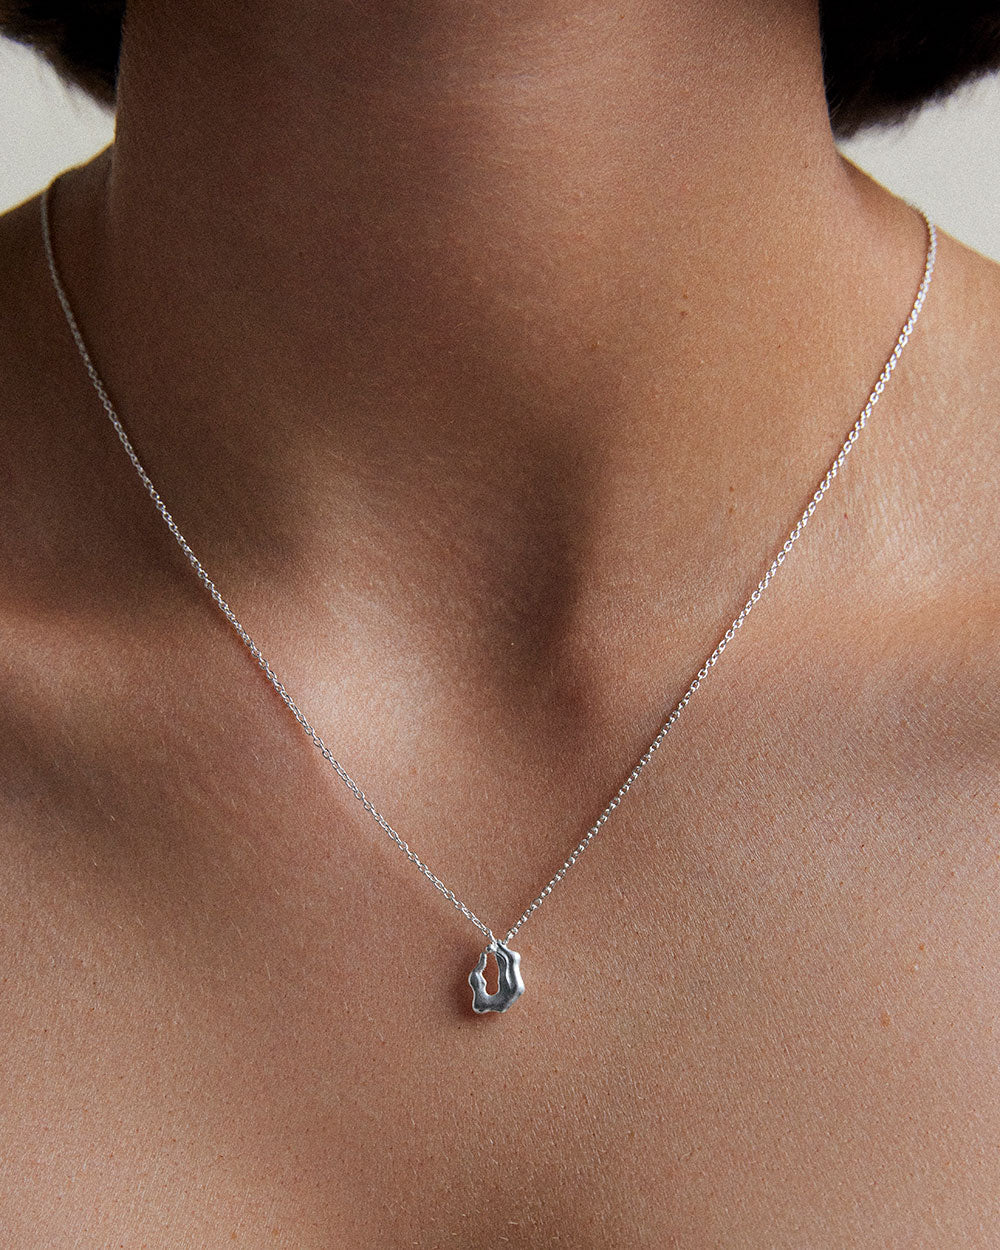 Aquarius Layered Silver Necklace | Layered necklaces silver, Necklace, Silver  necklace